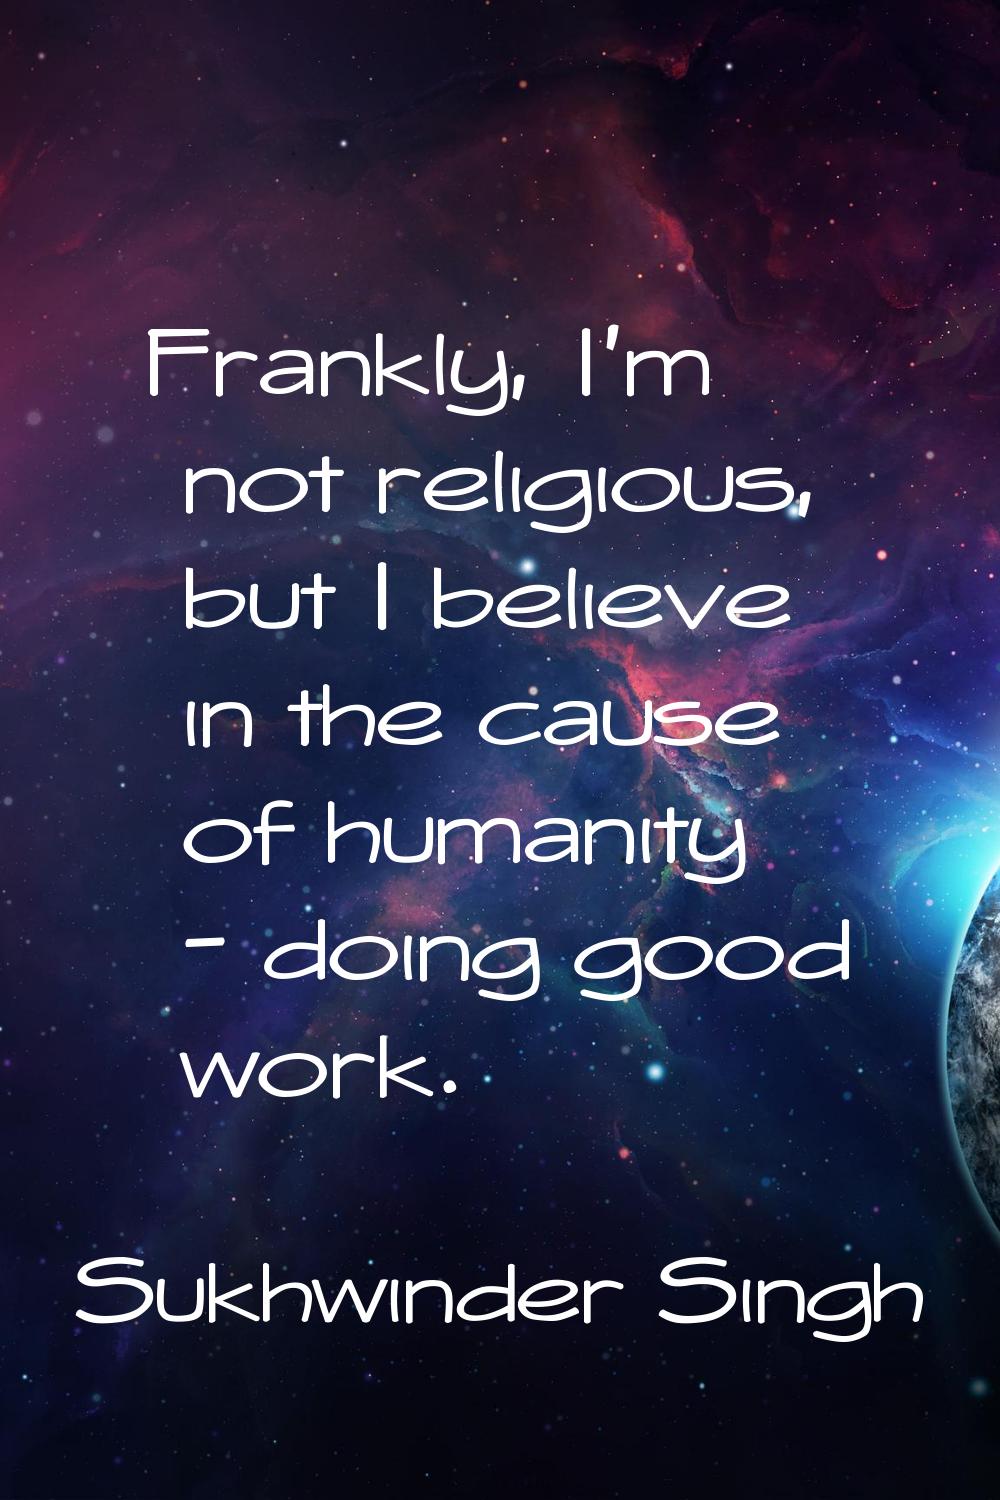 Frankly, I'm not religious, but I believe in the cause of humanity - doing good work.